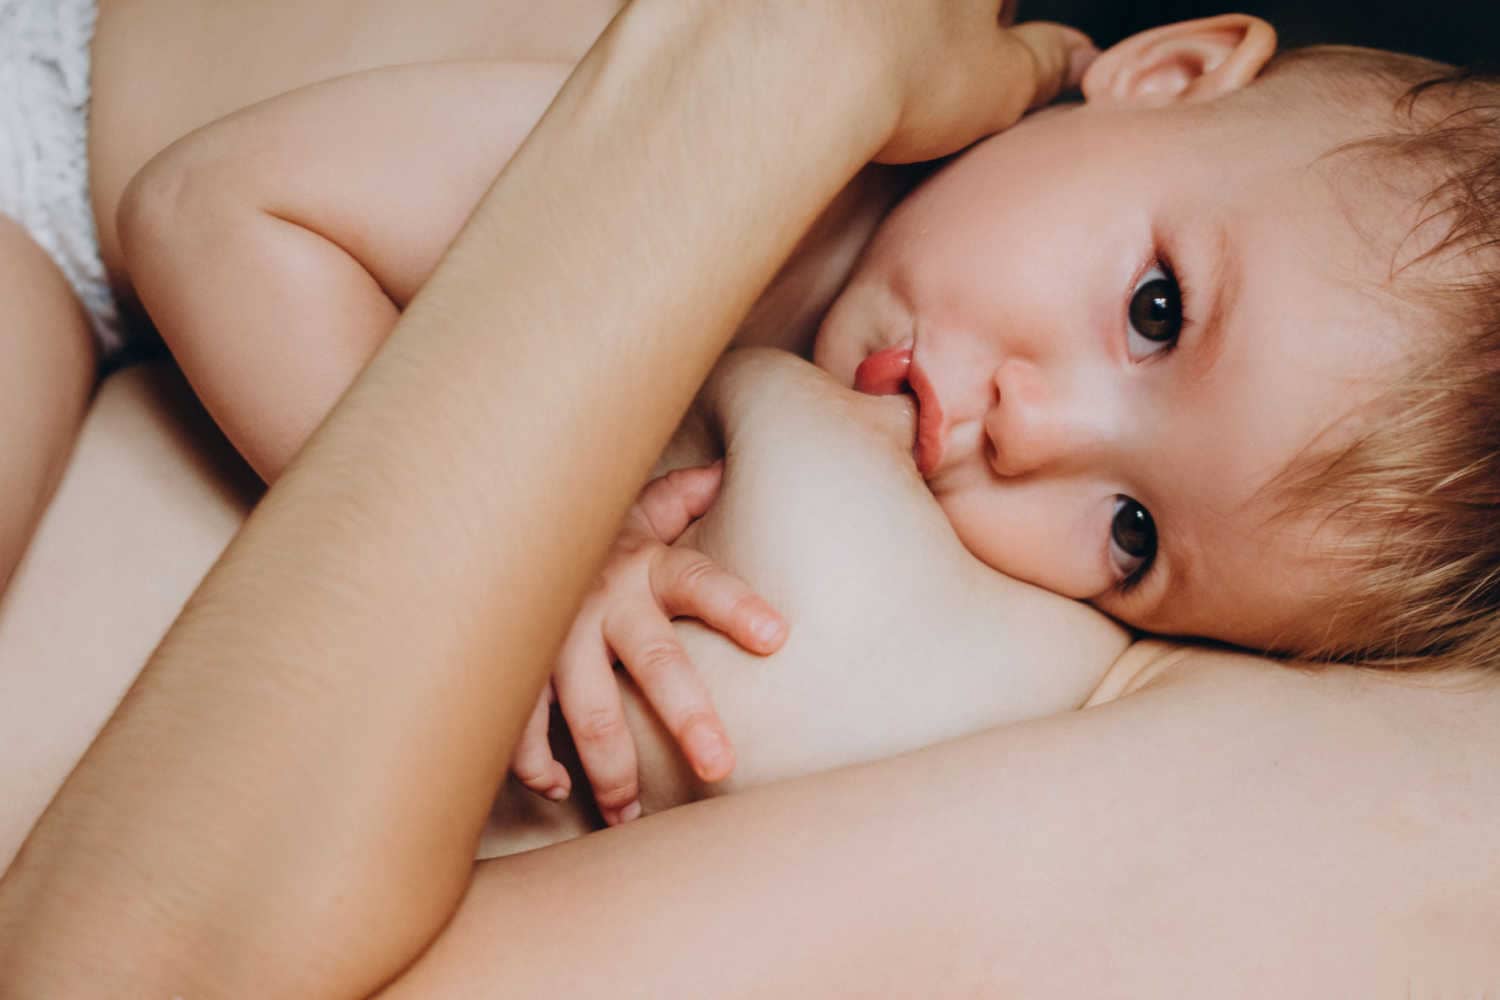 Reasons For Biting During Breastfeeding